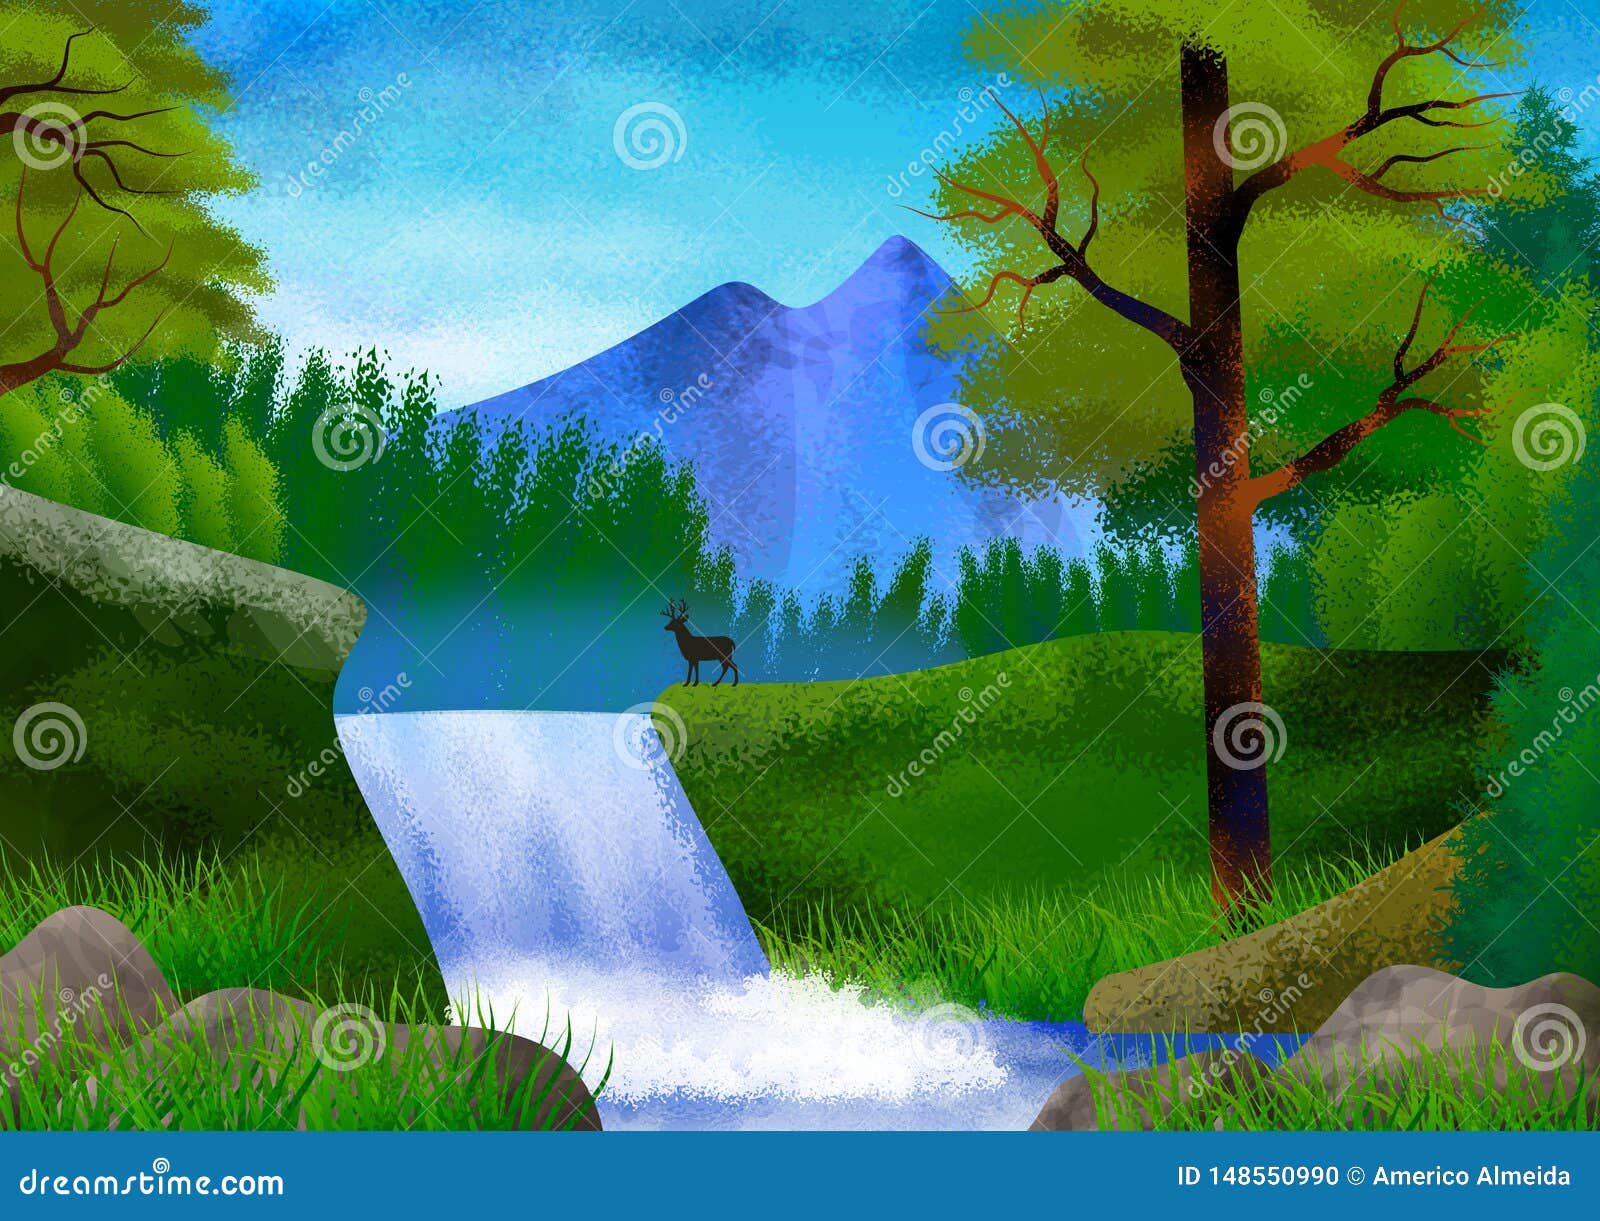 Nature Landscape with Mountain, Trees, Hills and a River. Illustration.  Wallpaper Stock Illustration - Illustration of background, nature: 148550990